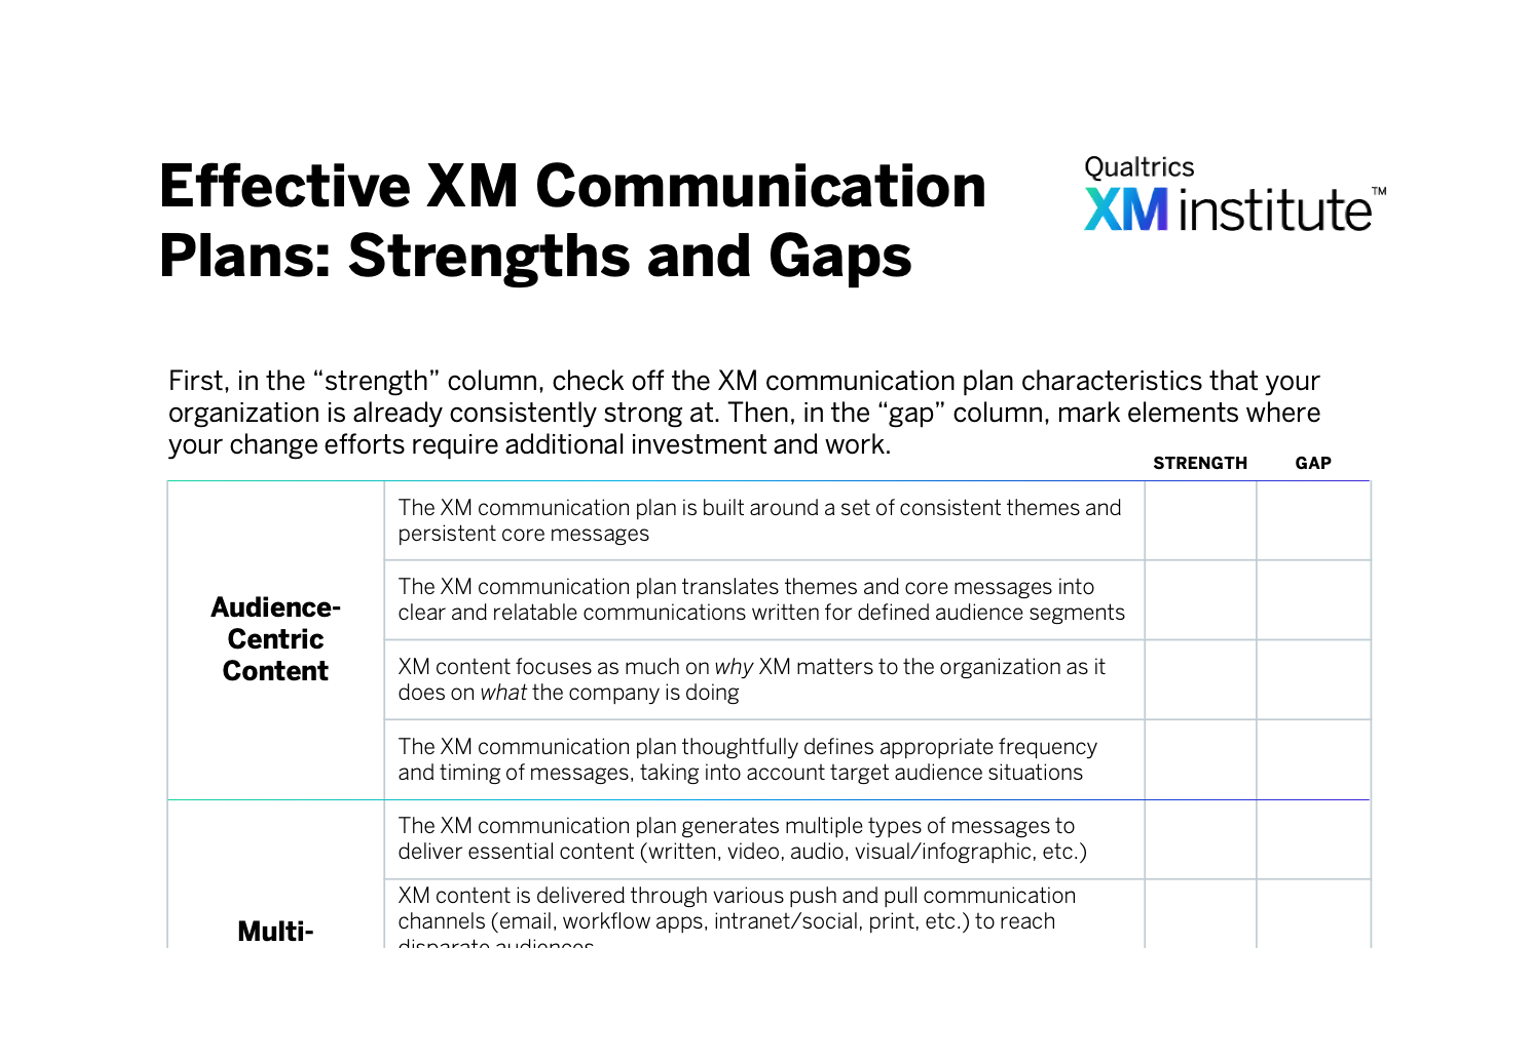 Effective XM Communication Plans: Strengths and Gaps